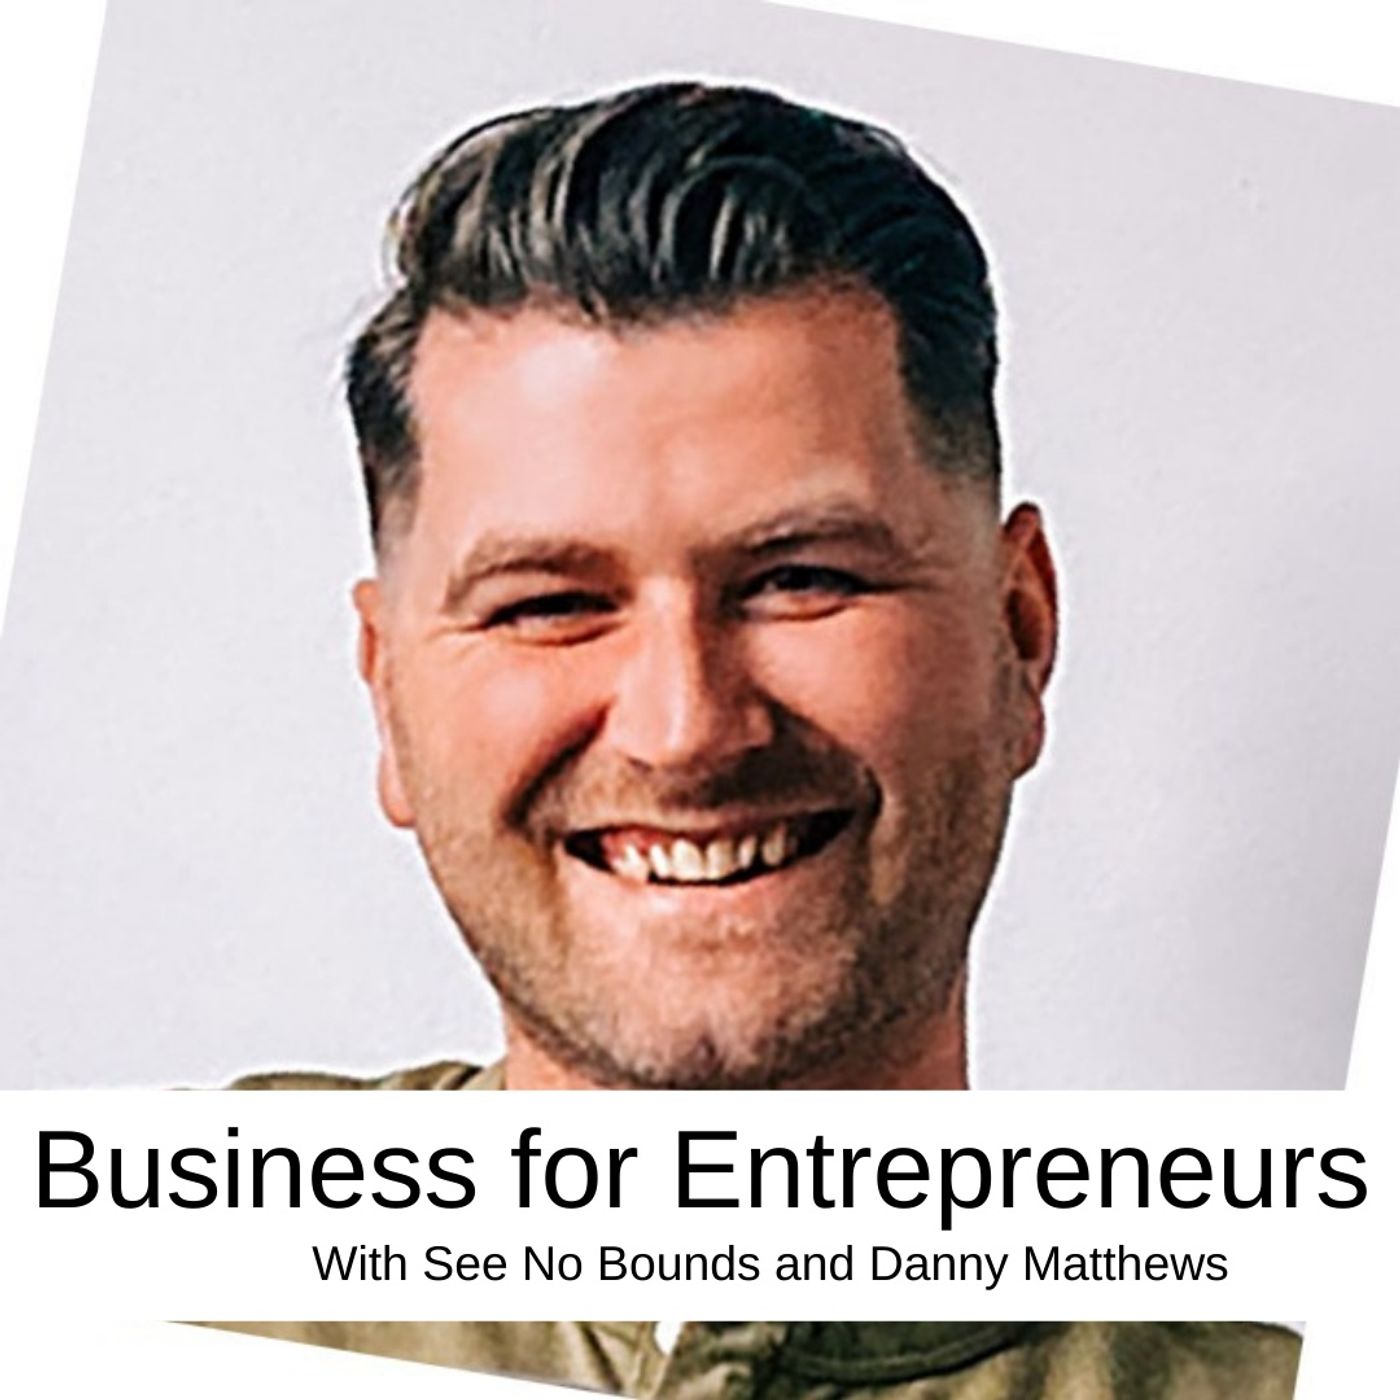 Business for Entrepreneurs with Danny Matthews